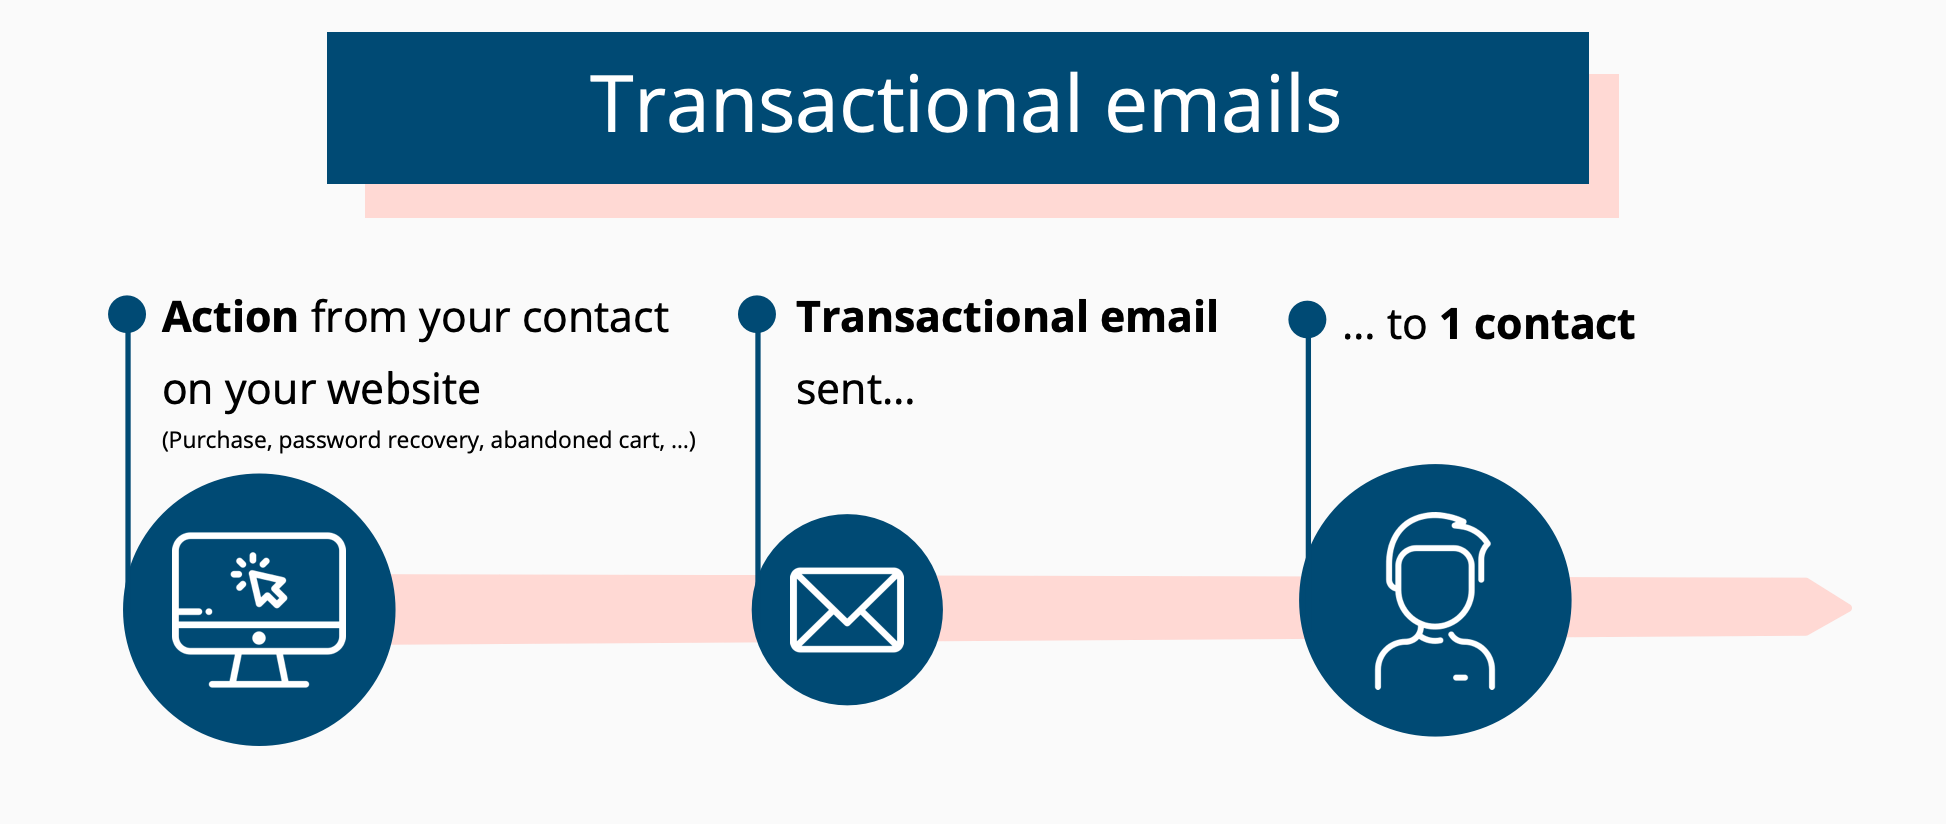 Transac_emails_explained.png